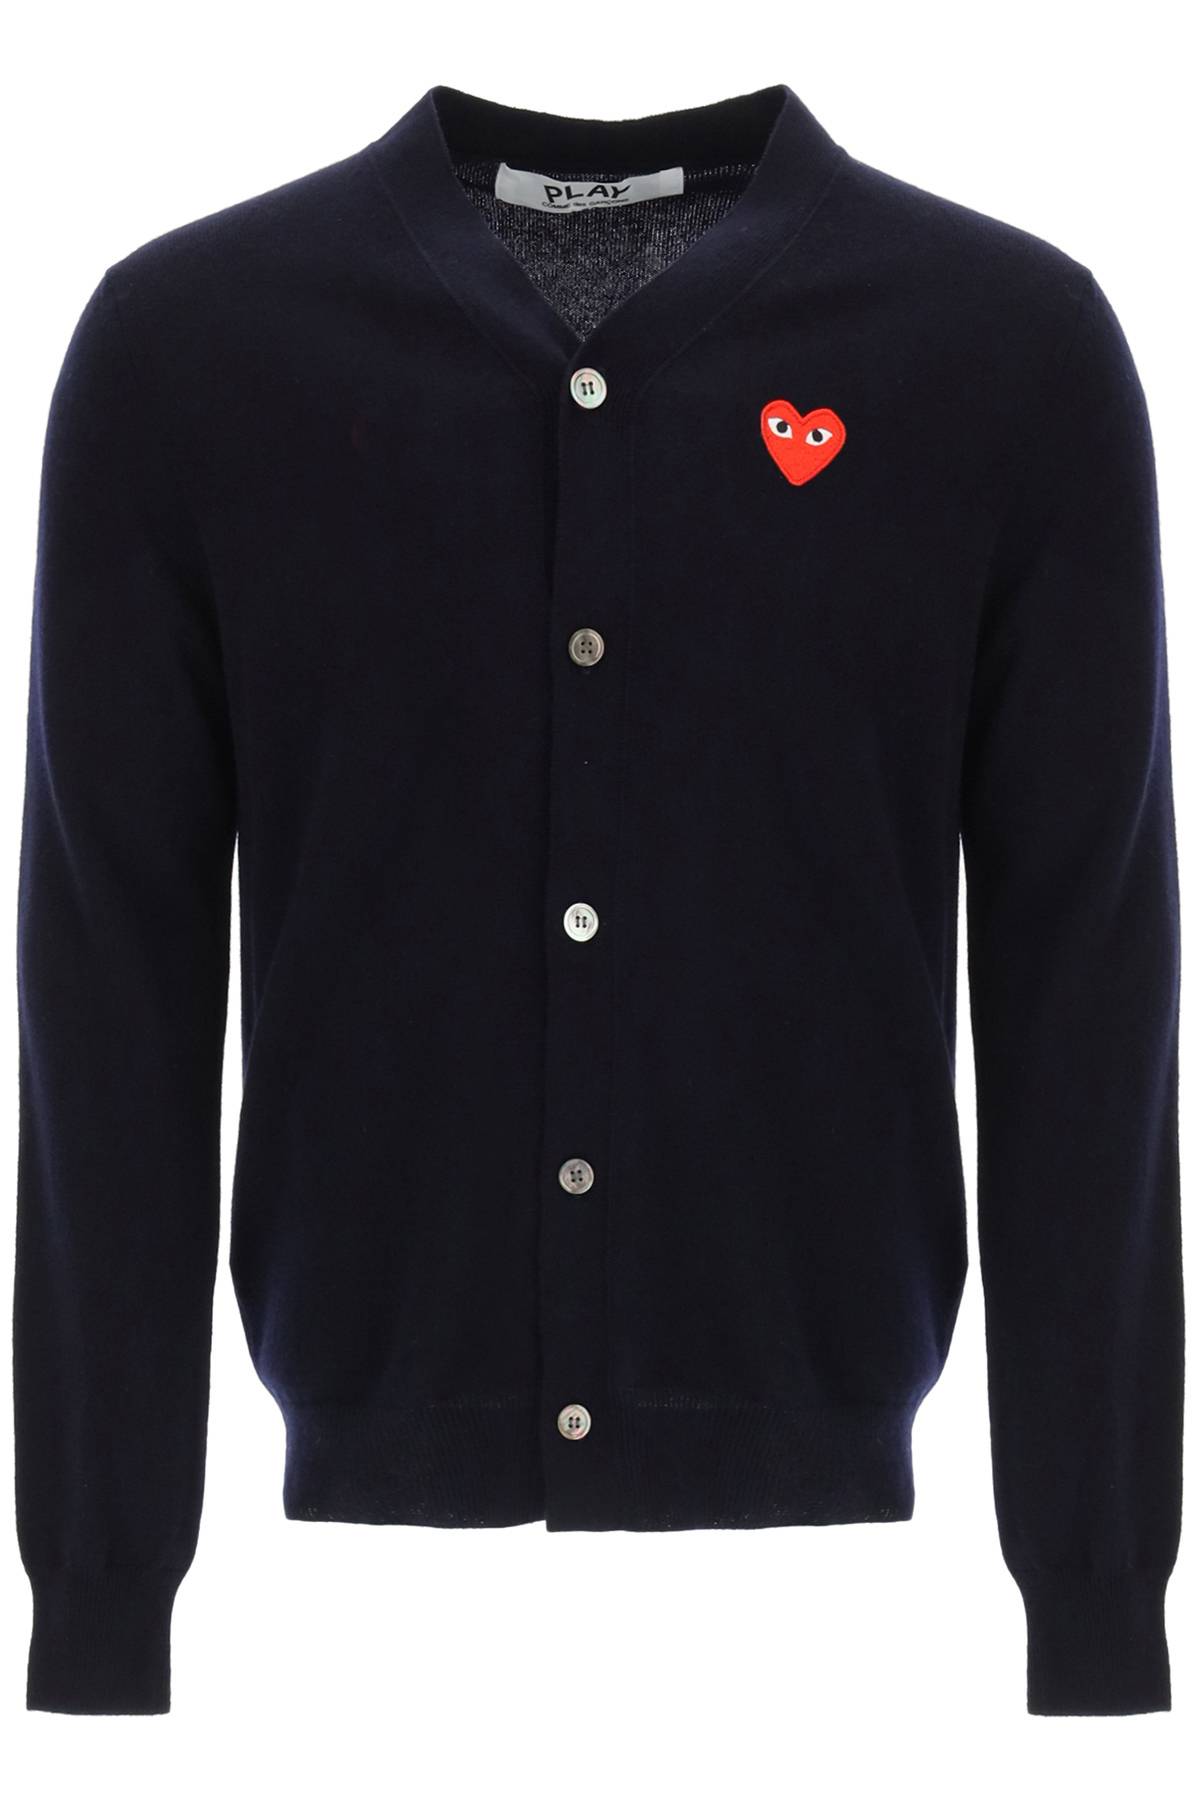 Comme Des Garçons Play COMME DES GARCONS PLAY wool cardigan with heart patch